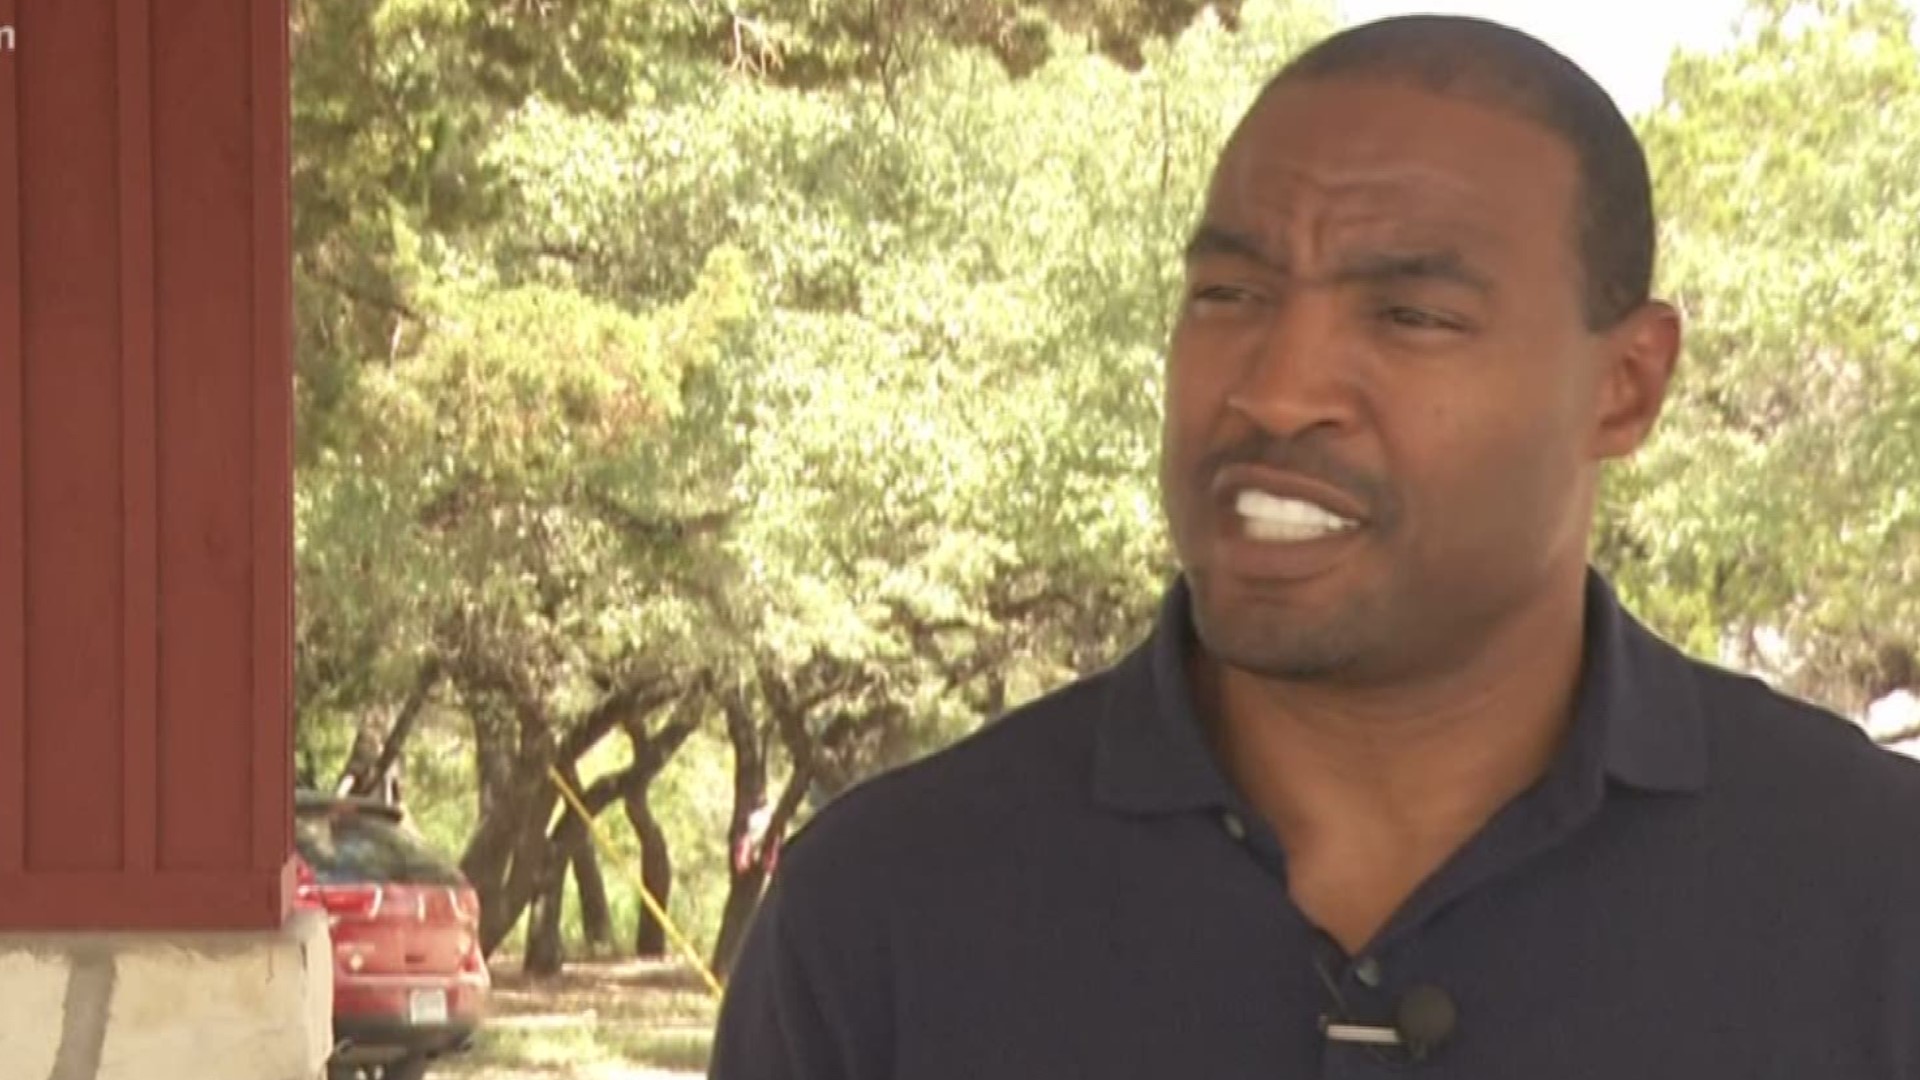 Darren Woodson was recently named the spokesman for a group that helps guide kids to college.